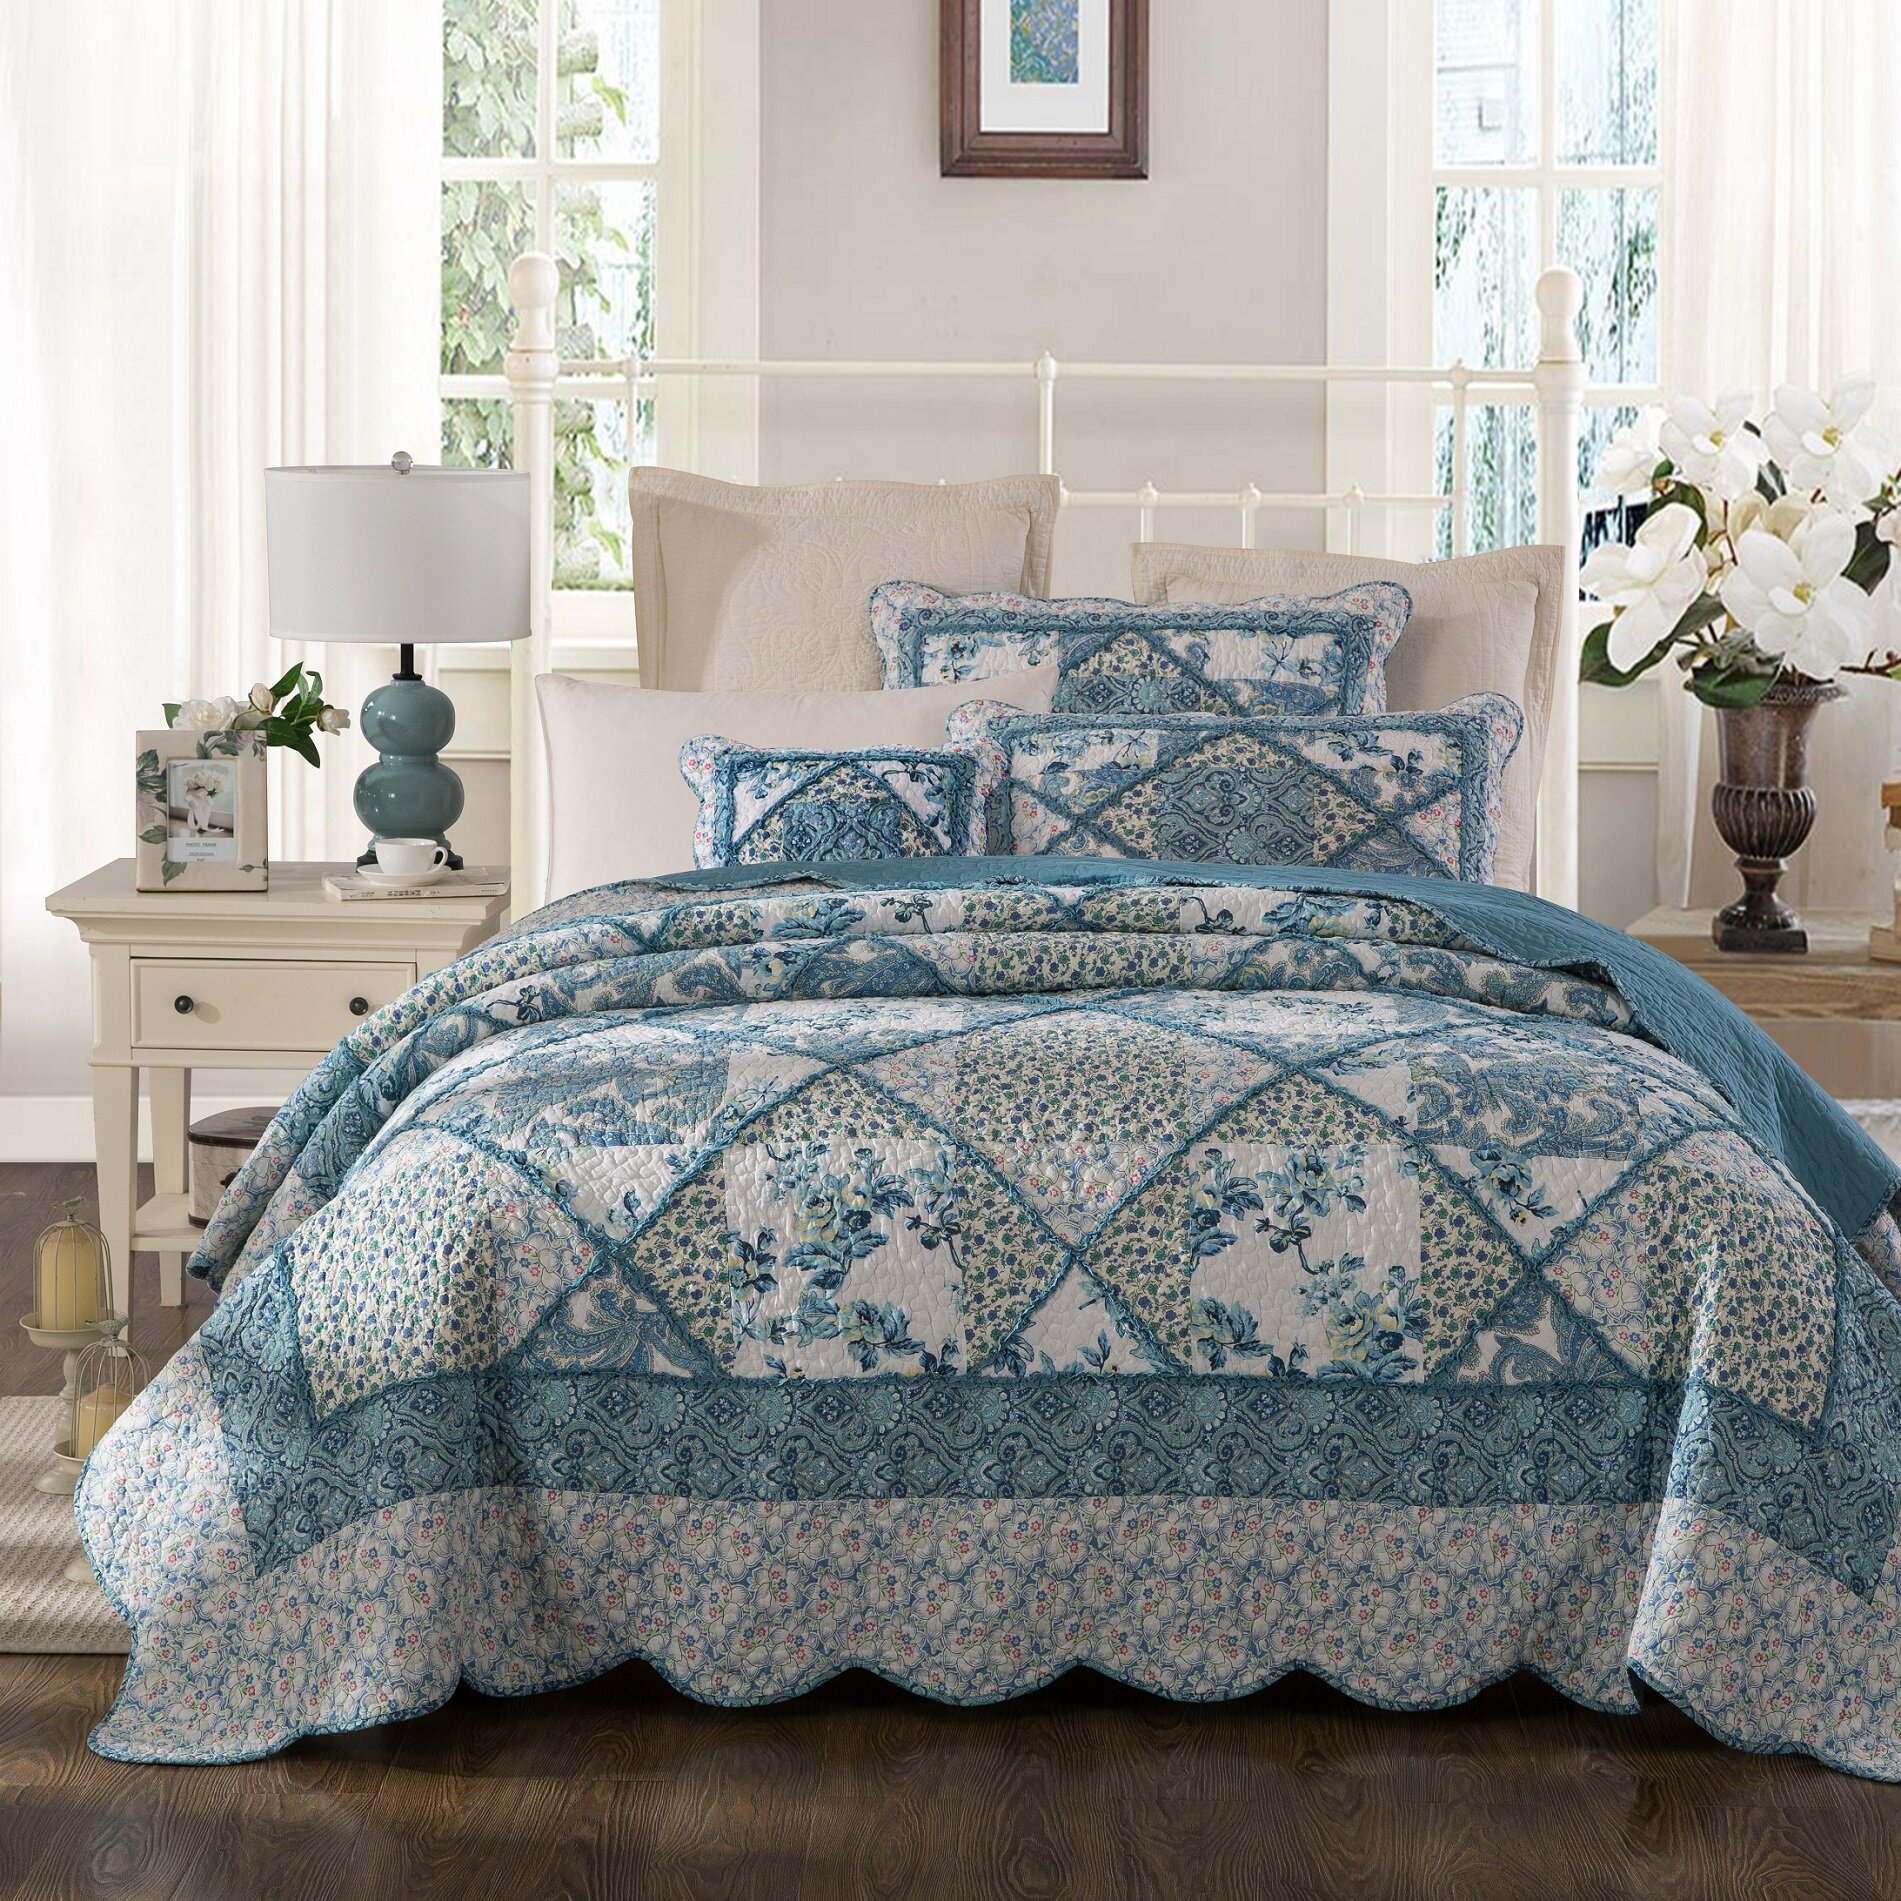 100% Cotton Quilts, Coverlets, & Sets You'll Love - Wayfair Canada